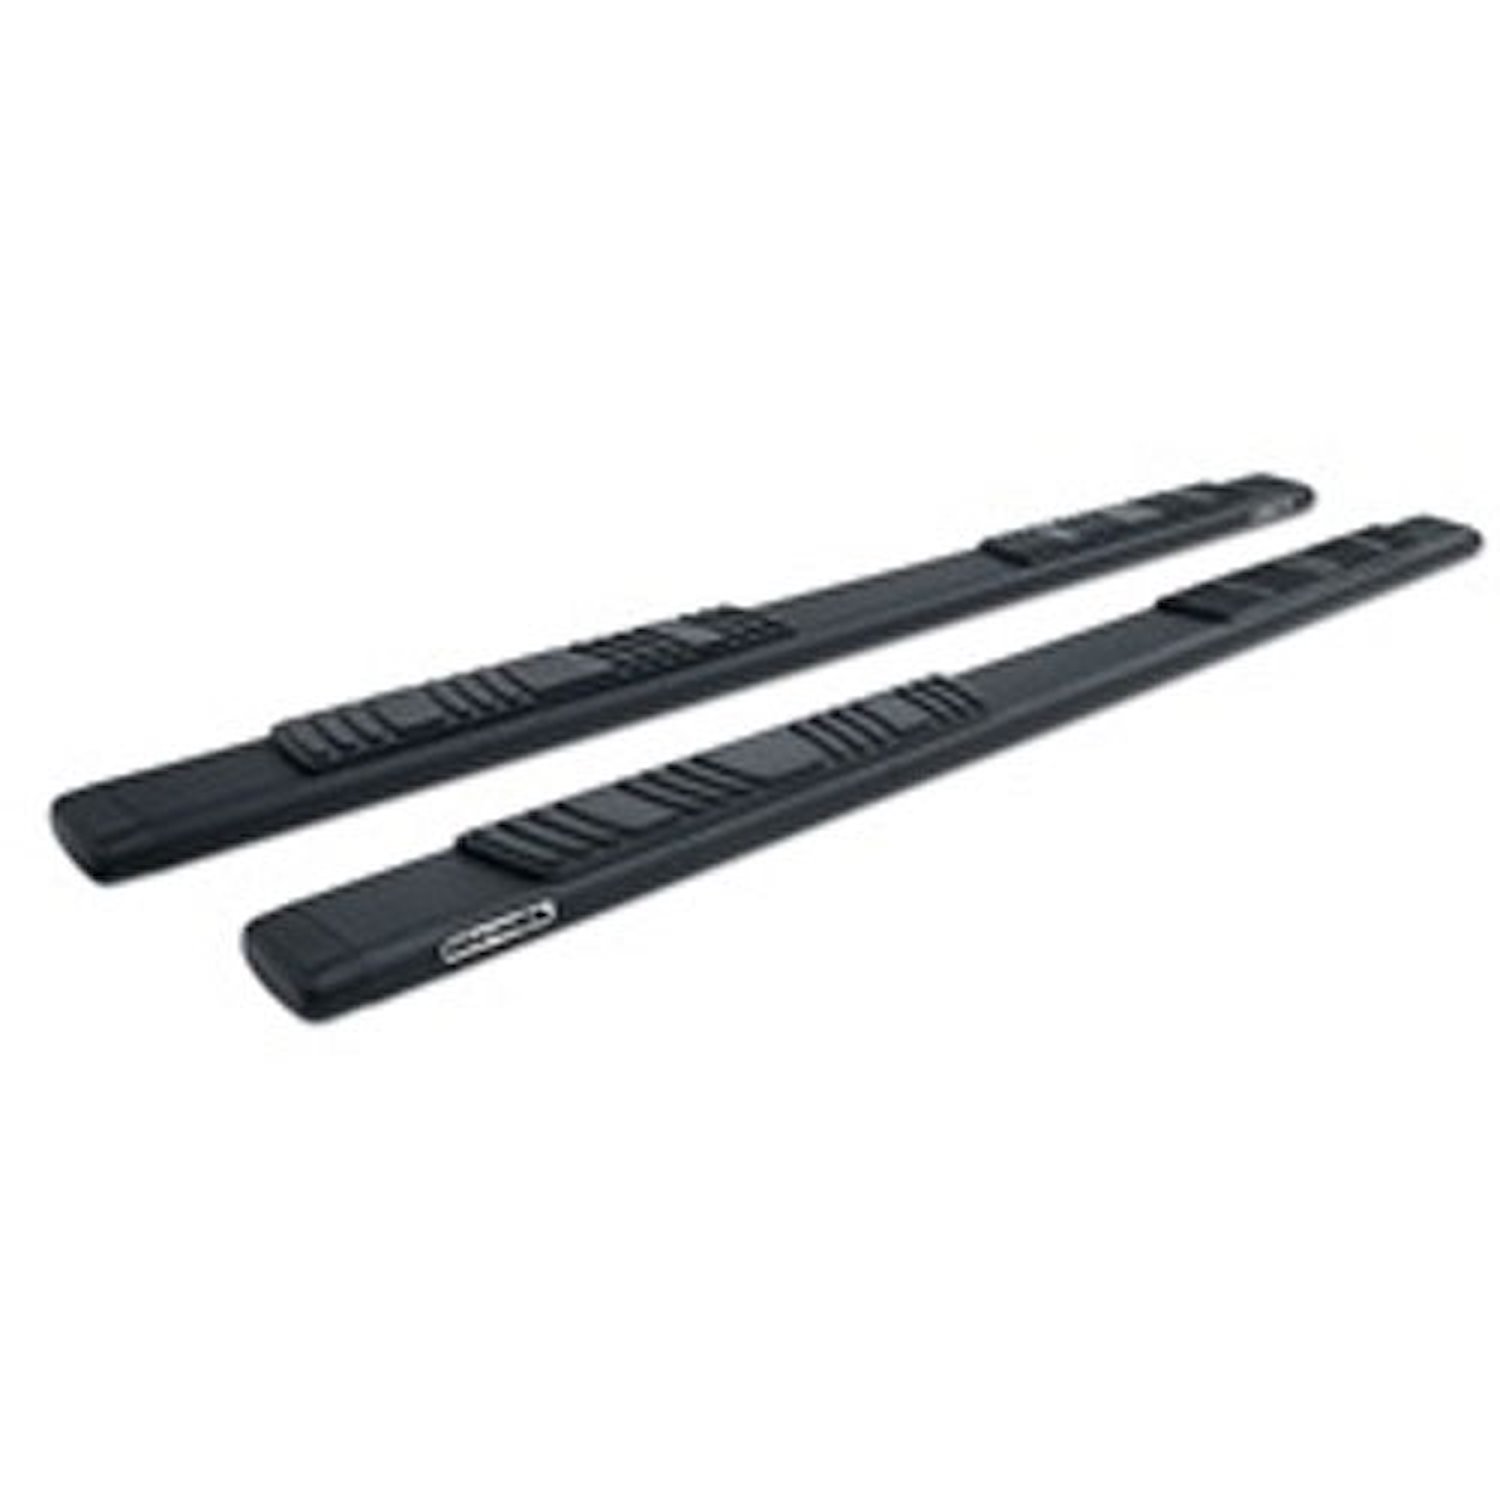 5 OE Xtreme Low Profile SideSteps 2015-16 Chevy